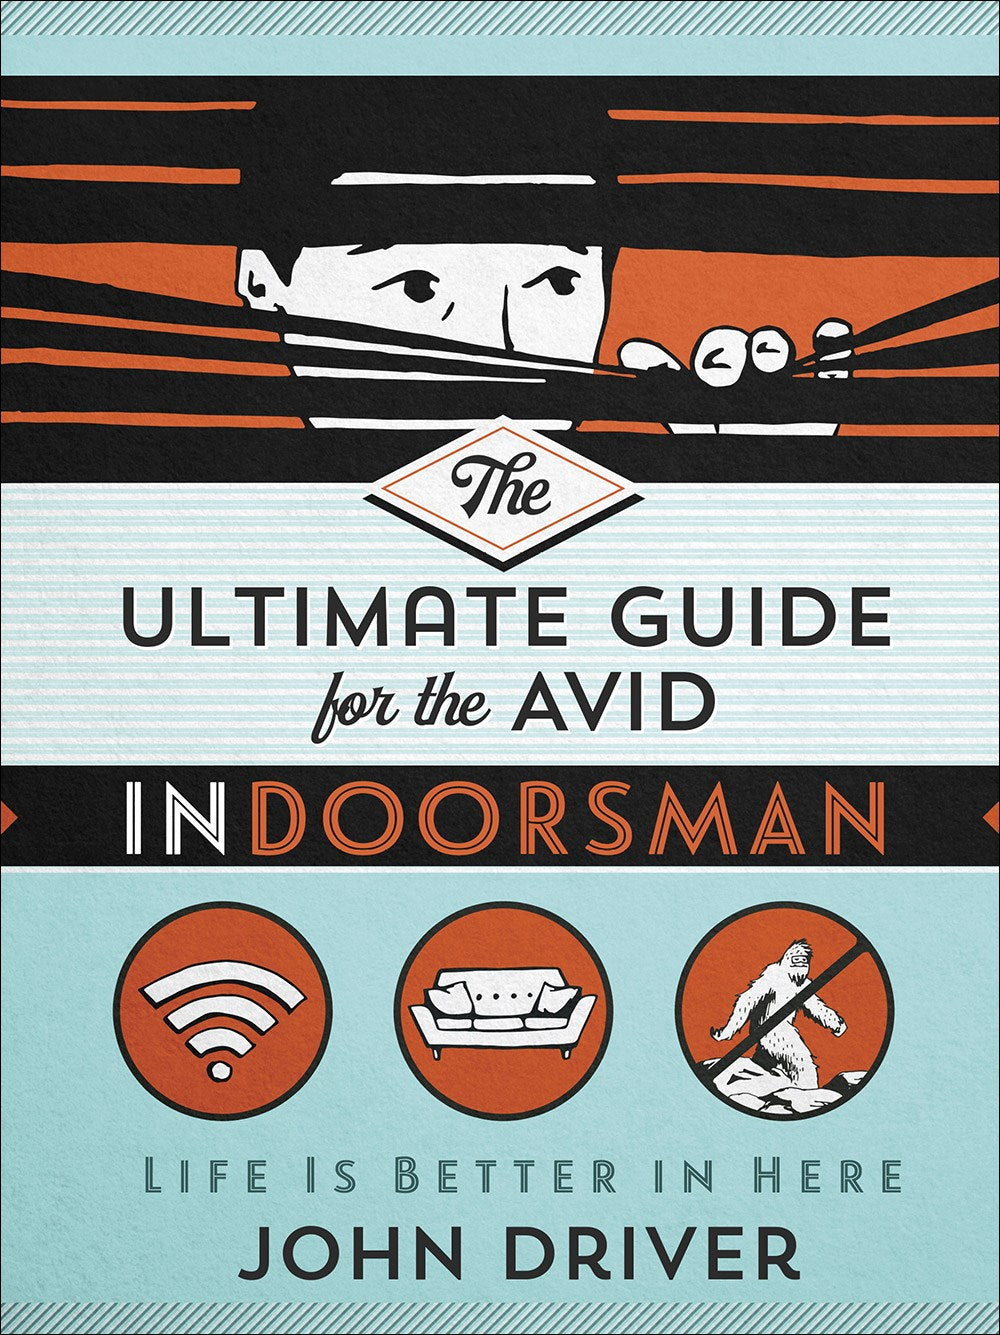 The Ultimate Guide For The Avid Indoorsman